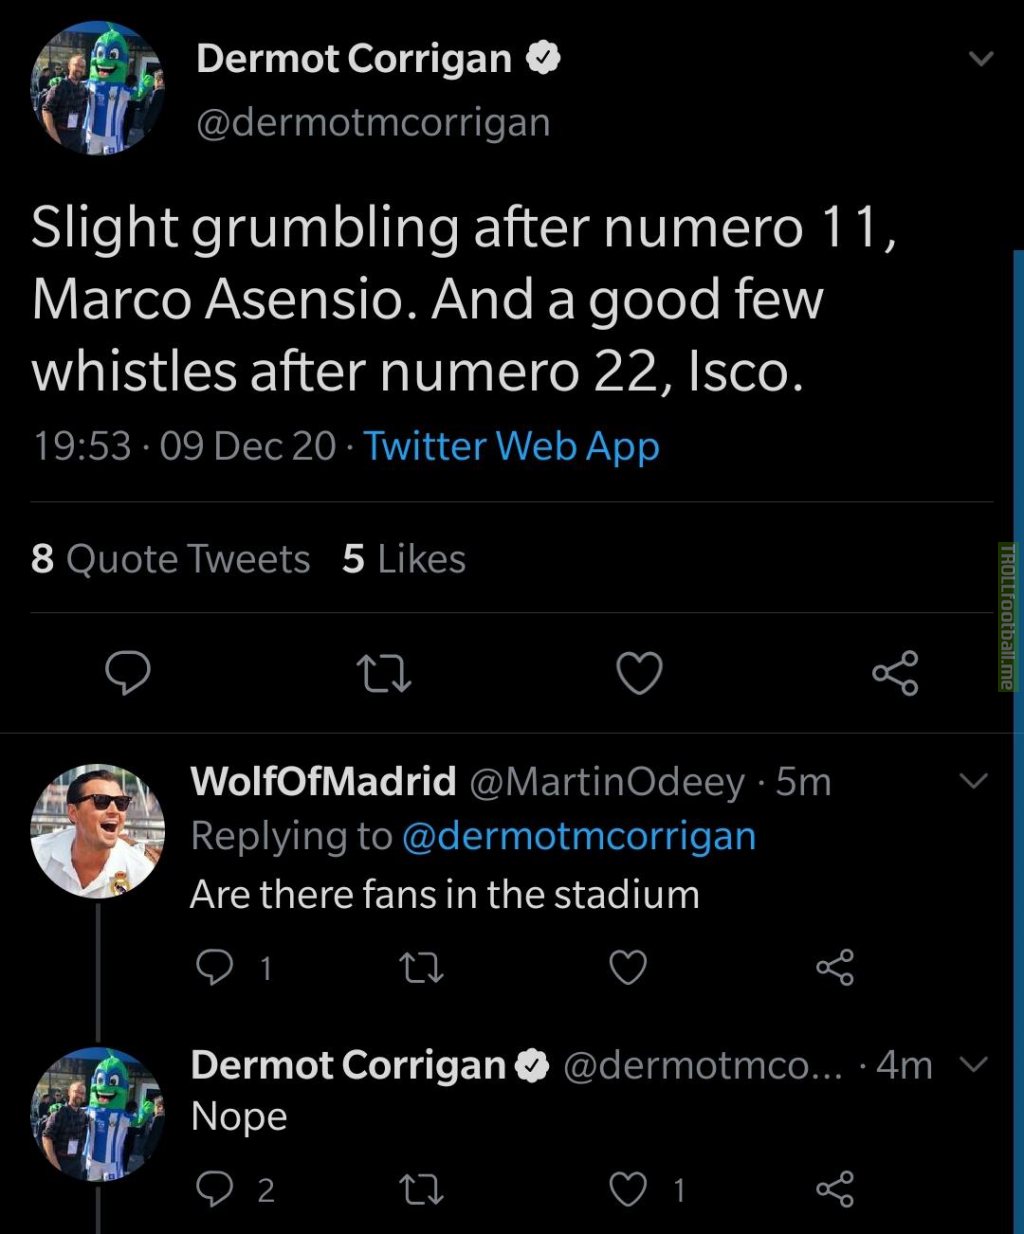 Journalist reporting from the Bernabeu